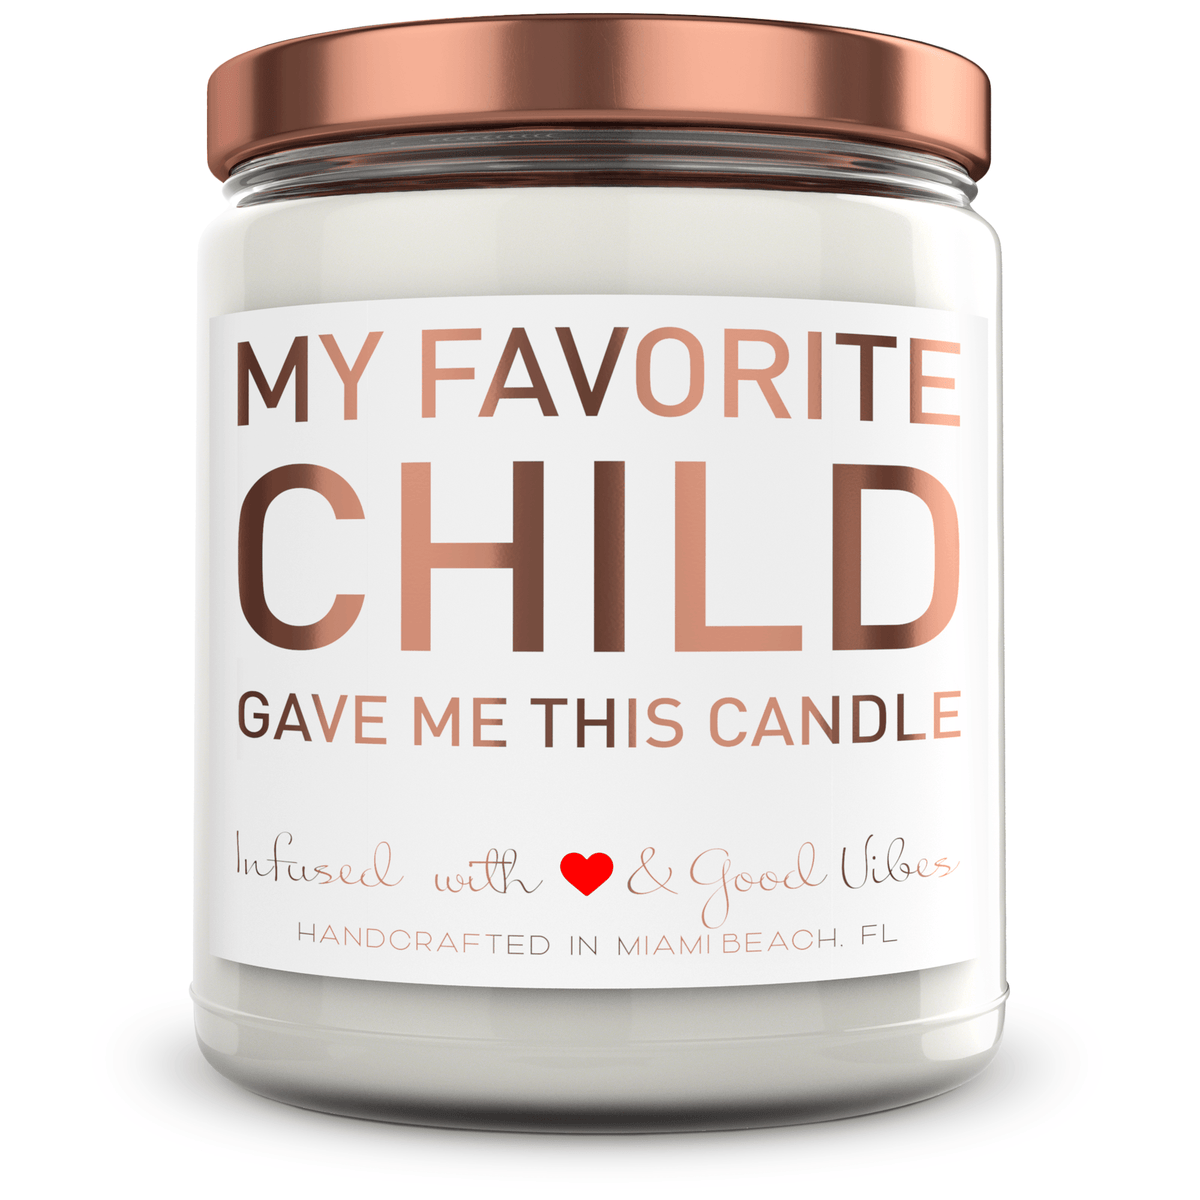 My Favorite Child gave me this candle - Mint Sugar Candle